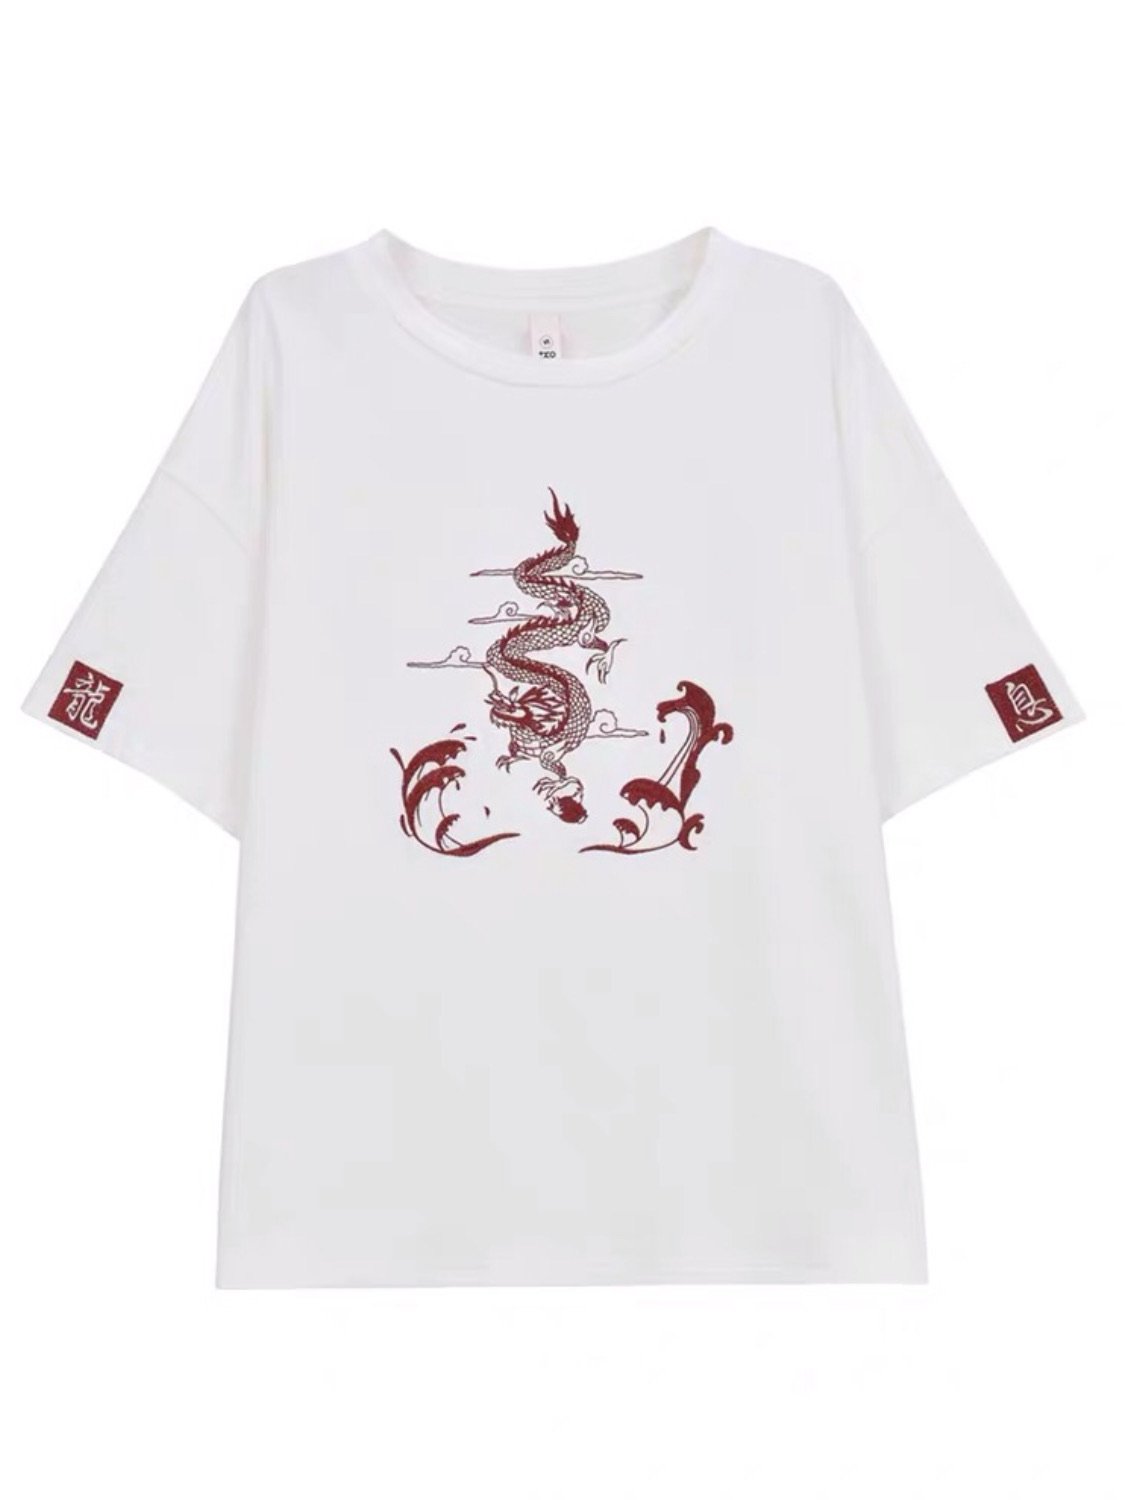 Golden Dragon Chinese Unisex Tees-ntbhshop